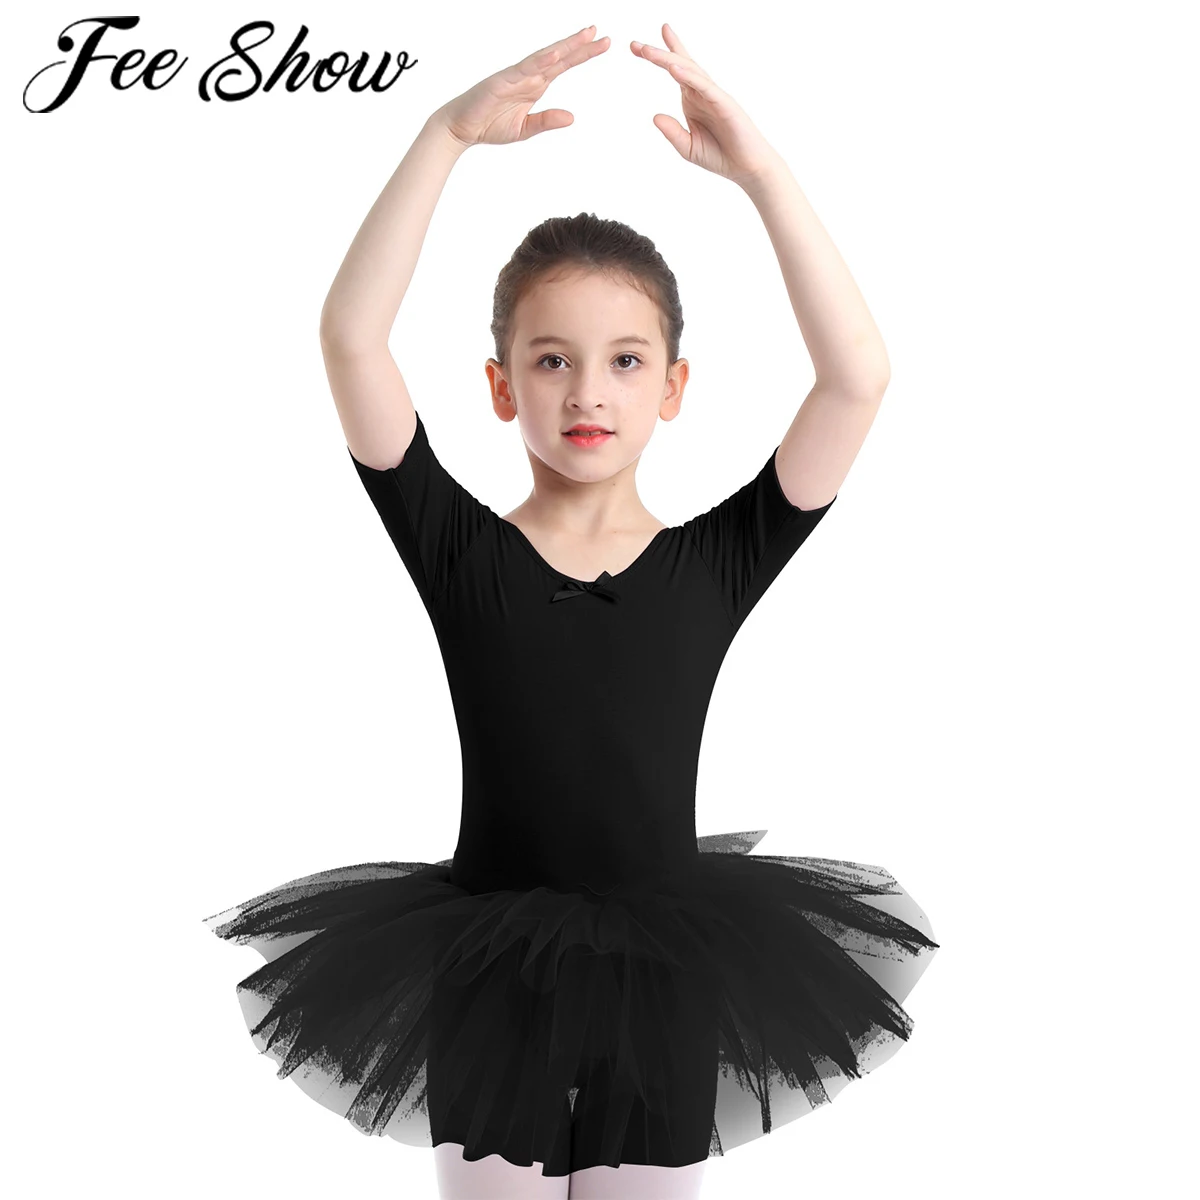 Ballet Leotard with Tutu Skirt for Girls Dance Gymnastics Toddlers Sparkly Snowflake Party Dress Outfit 